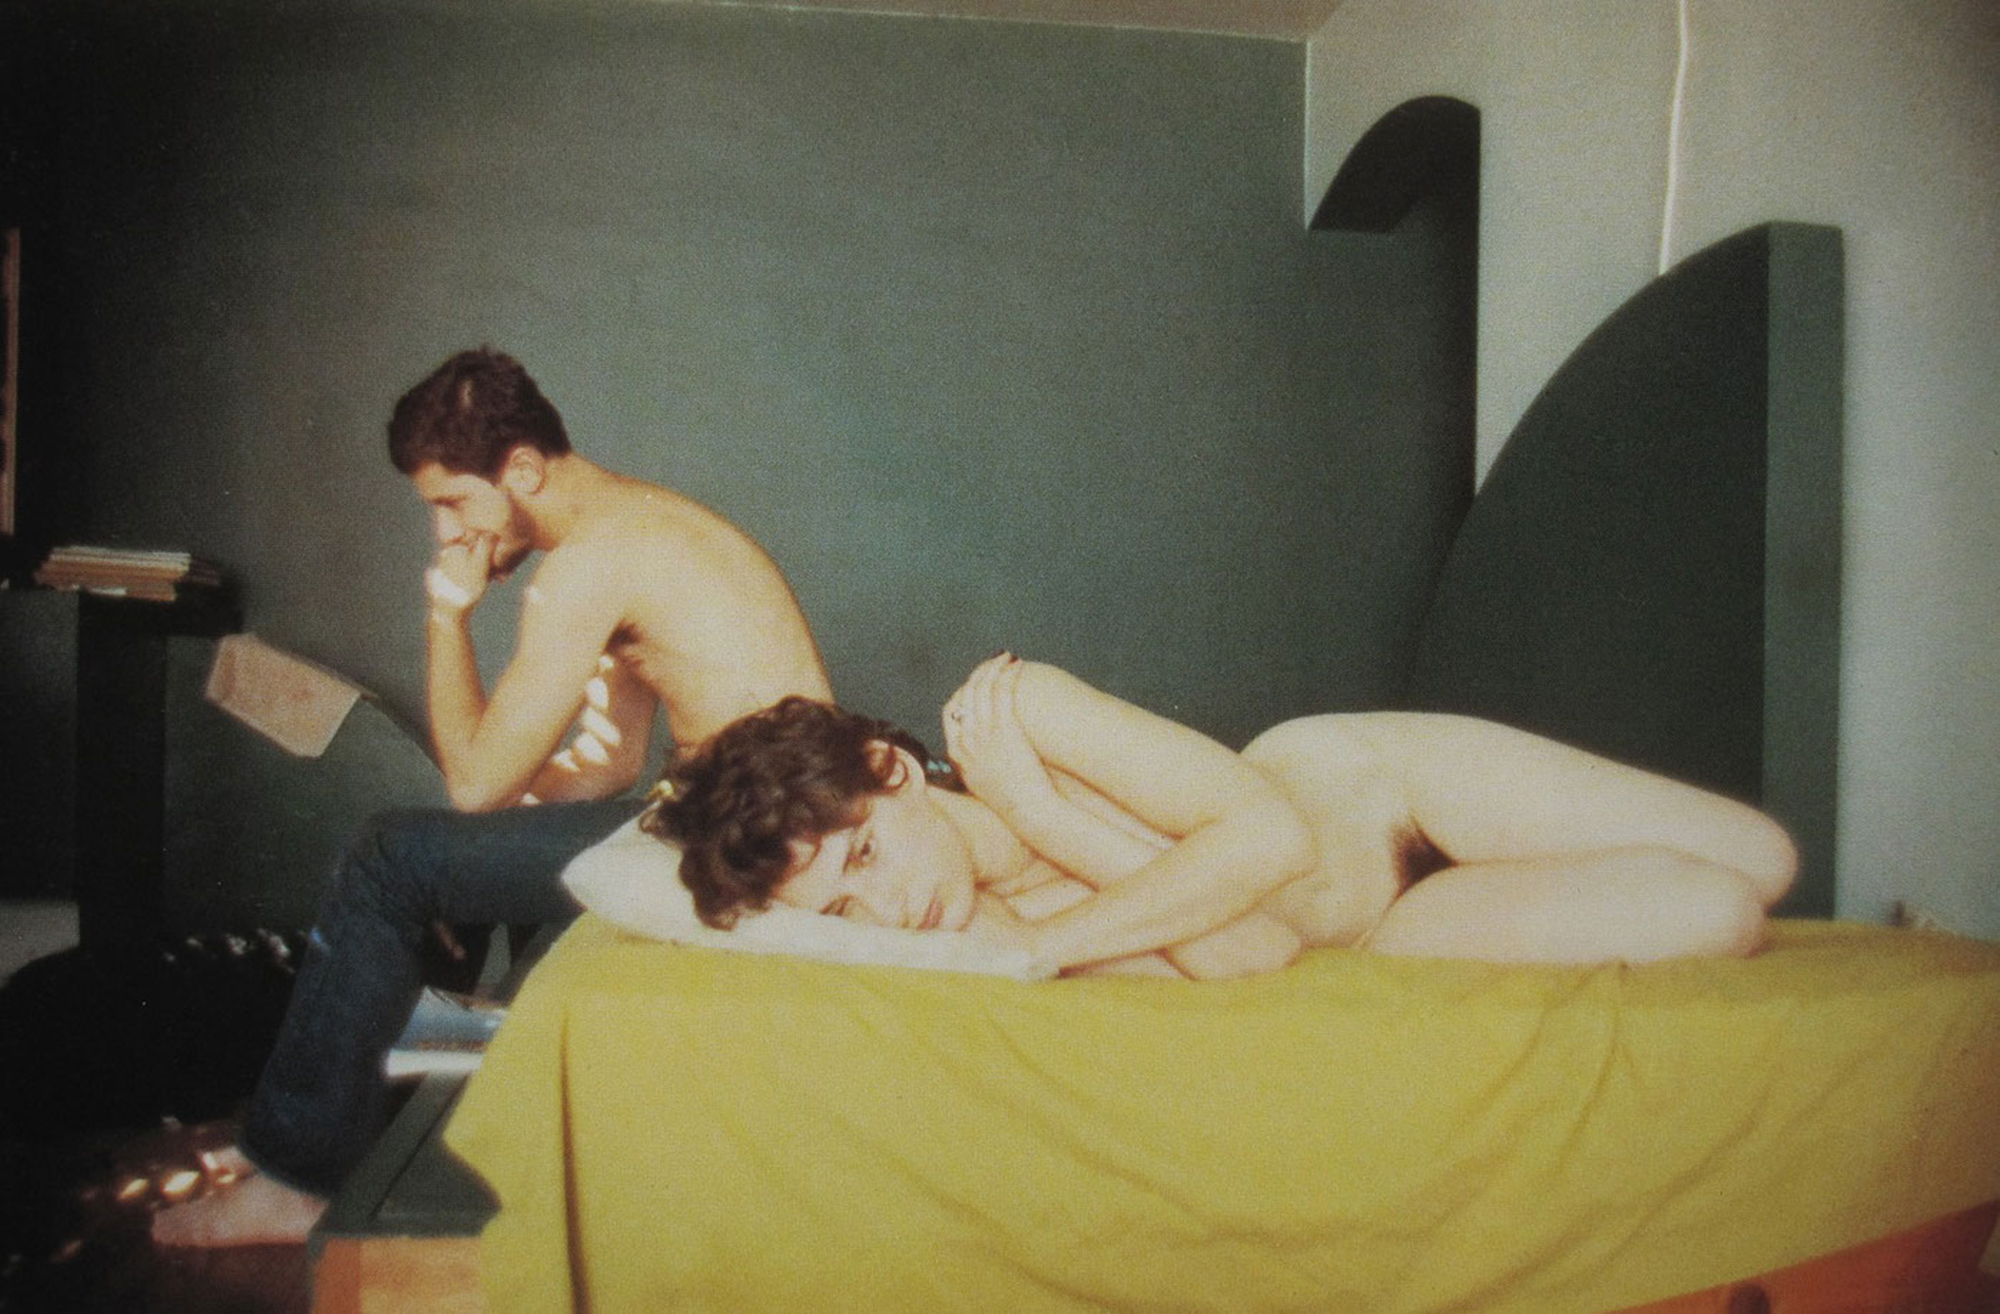 Couple in Bed, Chicago © Nan Goldin 1977 | Image source internet